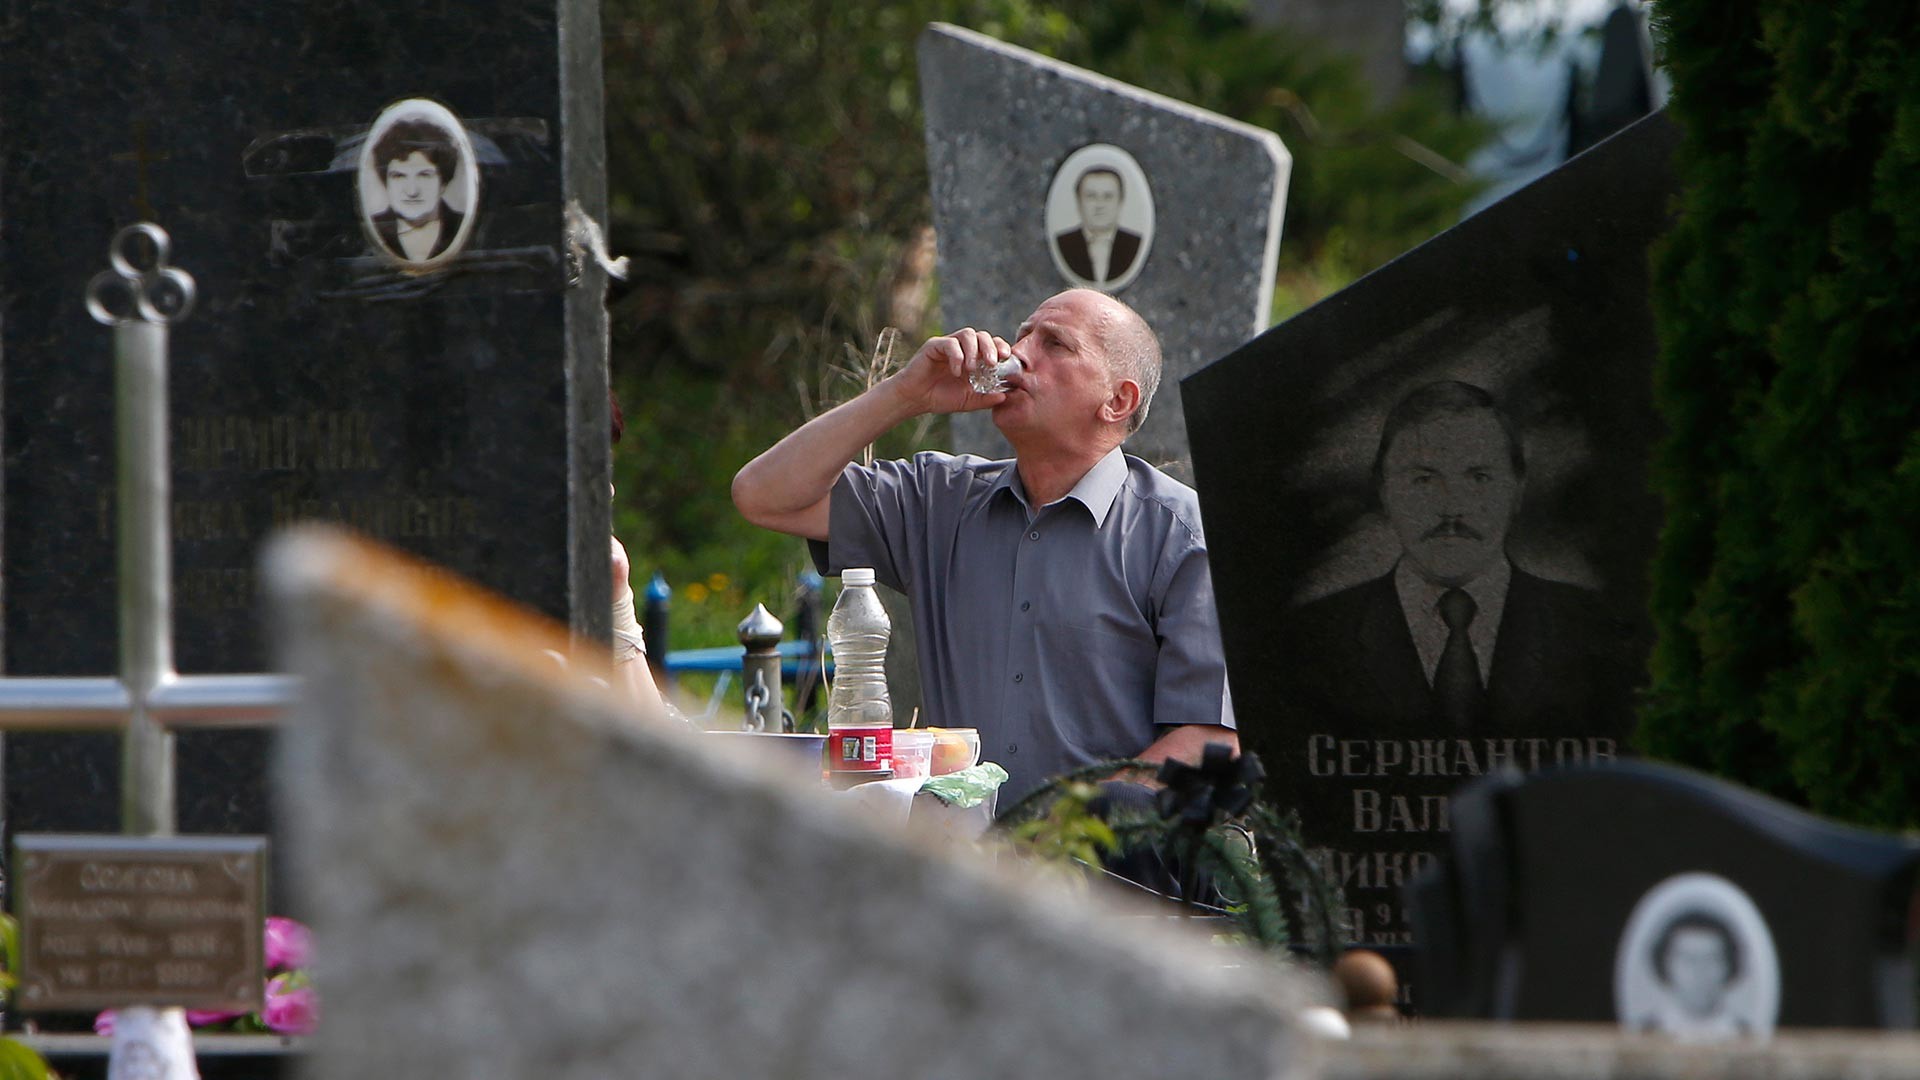 A man drinking on the grave site during Radonitsa, a commemoration holiday.